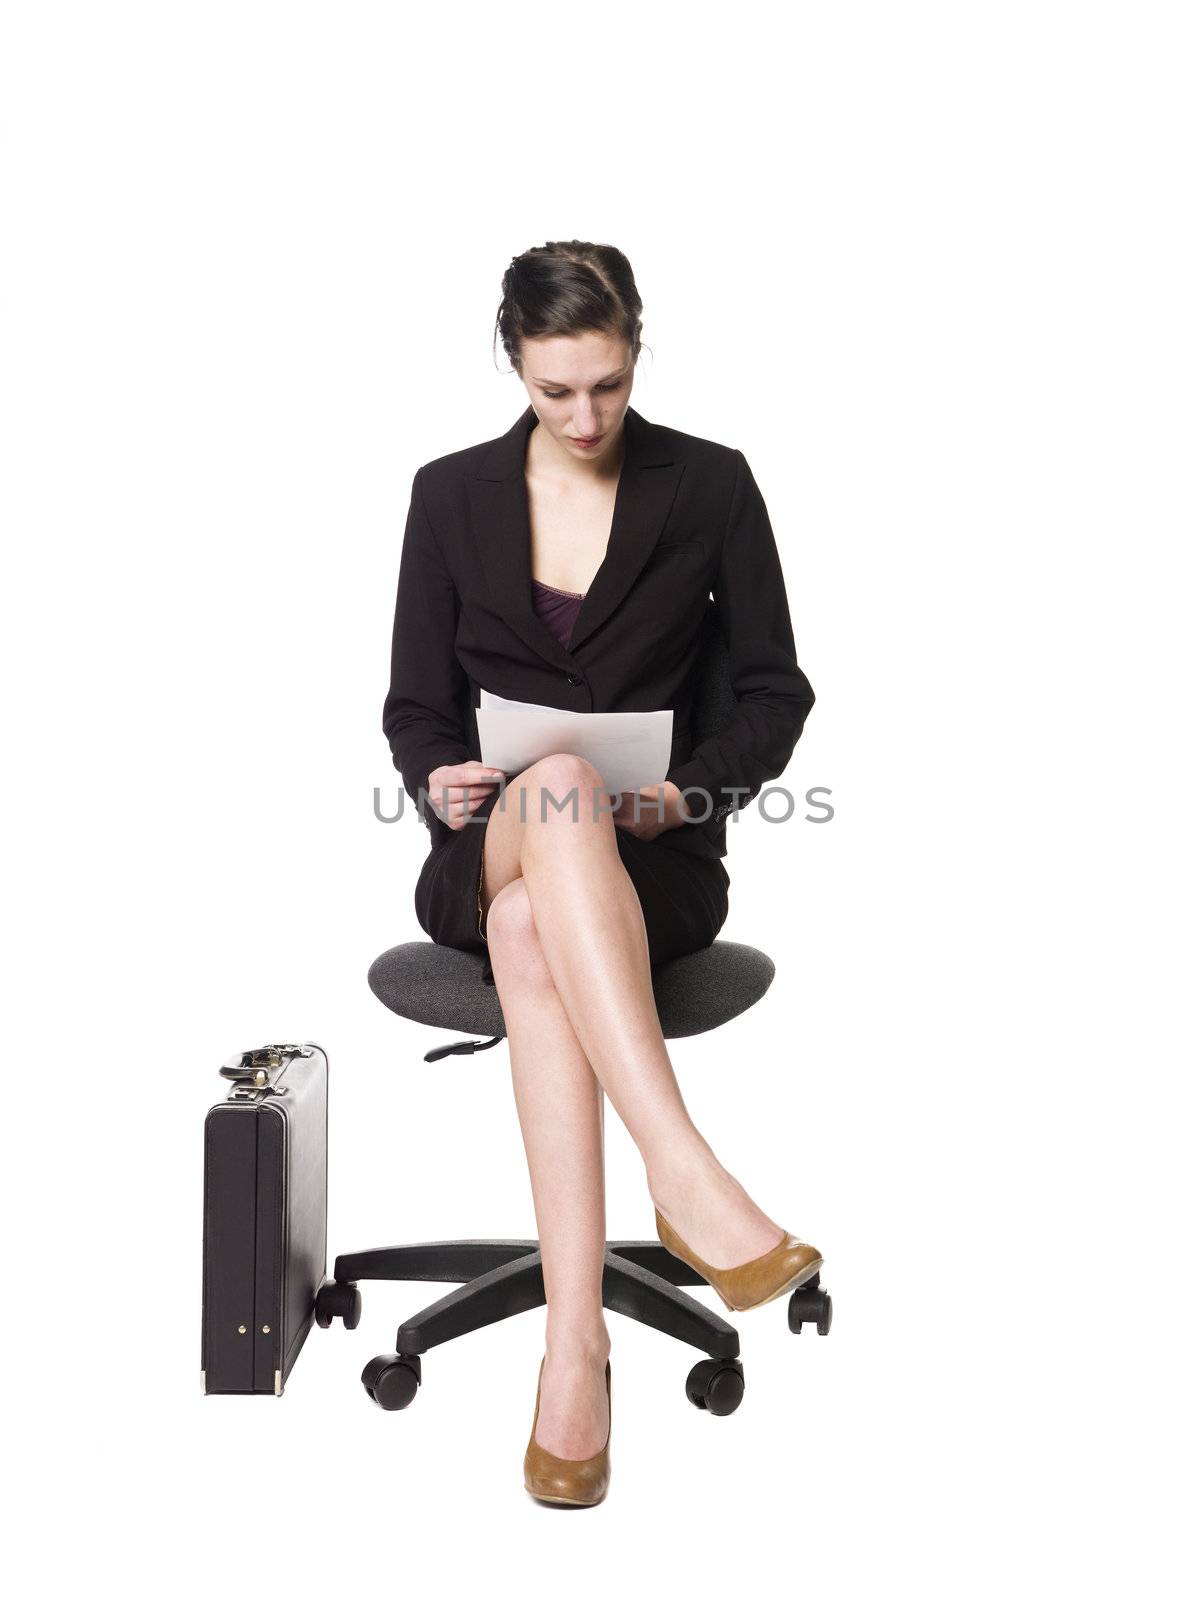 Buisness woman sitting on a chair